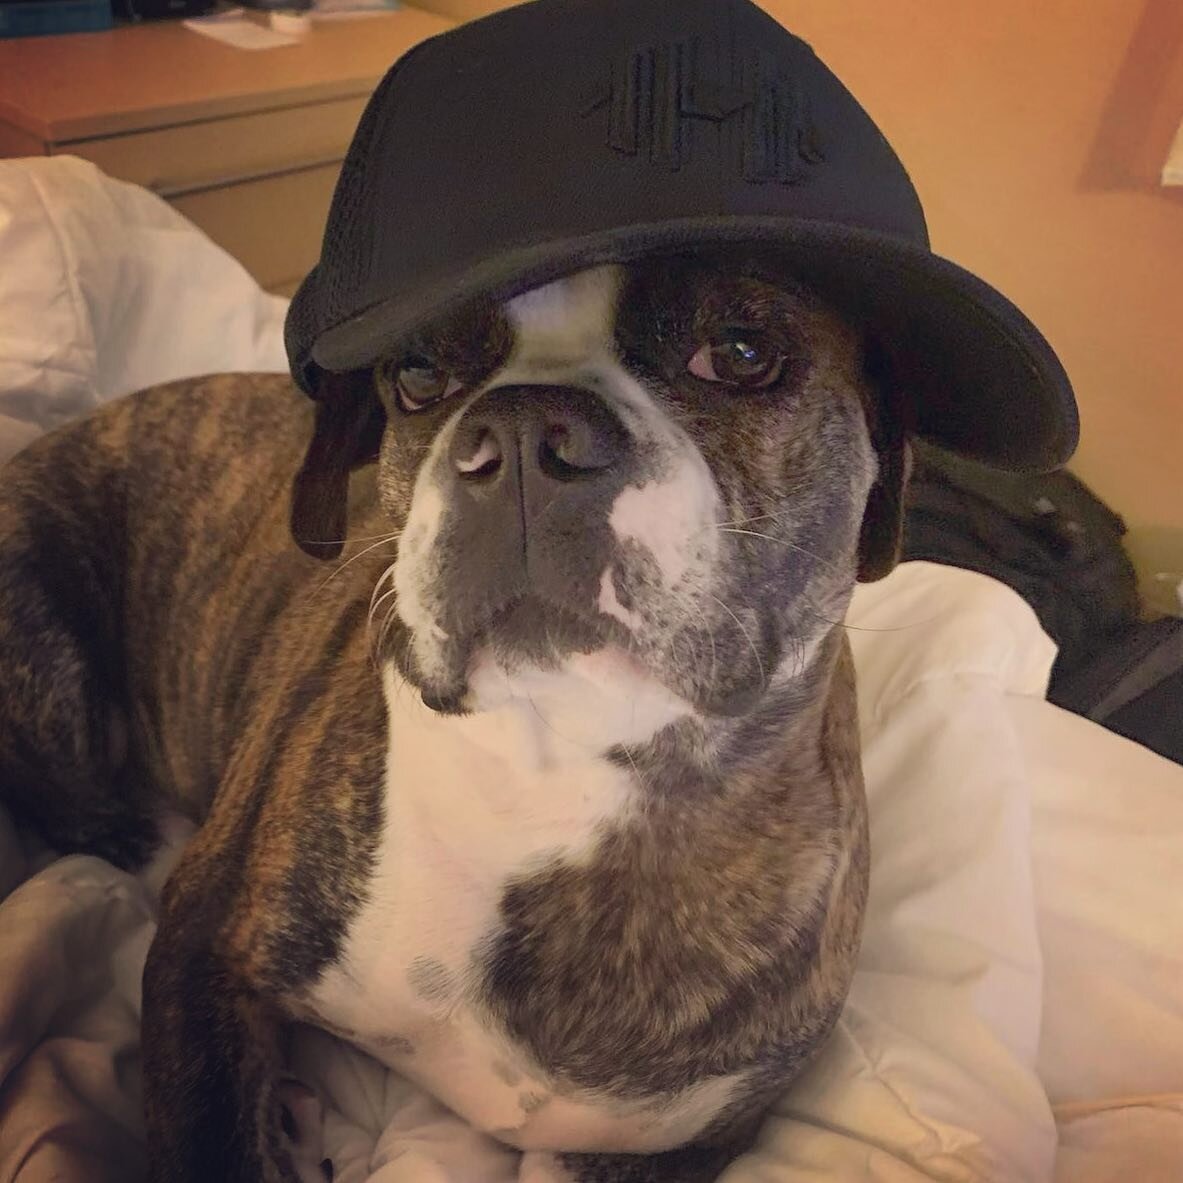 Meatball&rsquo;s #SundaySelfie game is strong 😎

He&rsquo;s relaxing and repping our new #blackonblack fitted hat. In stock for $29.99+ tax!

What are you up to this Sunday? ☀️